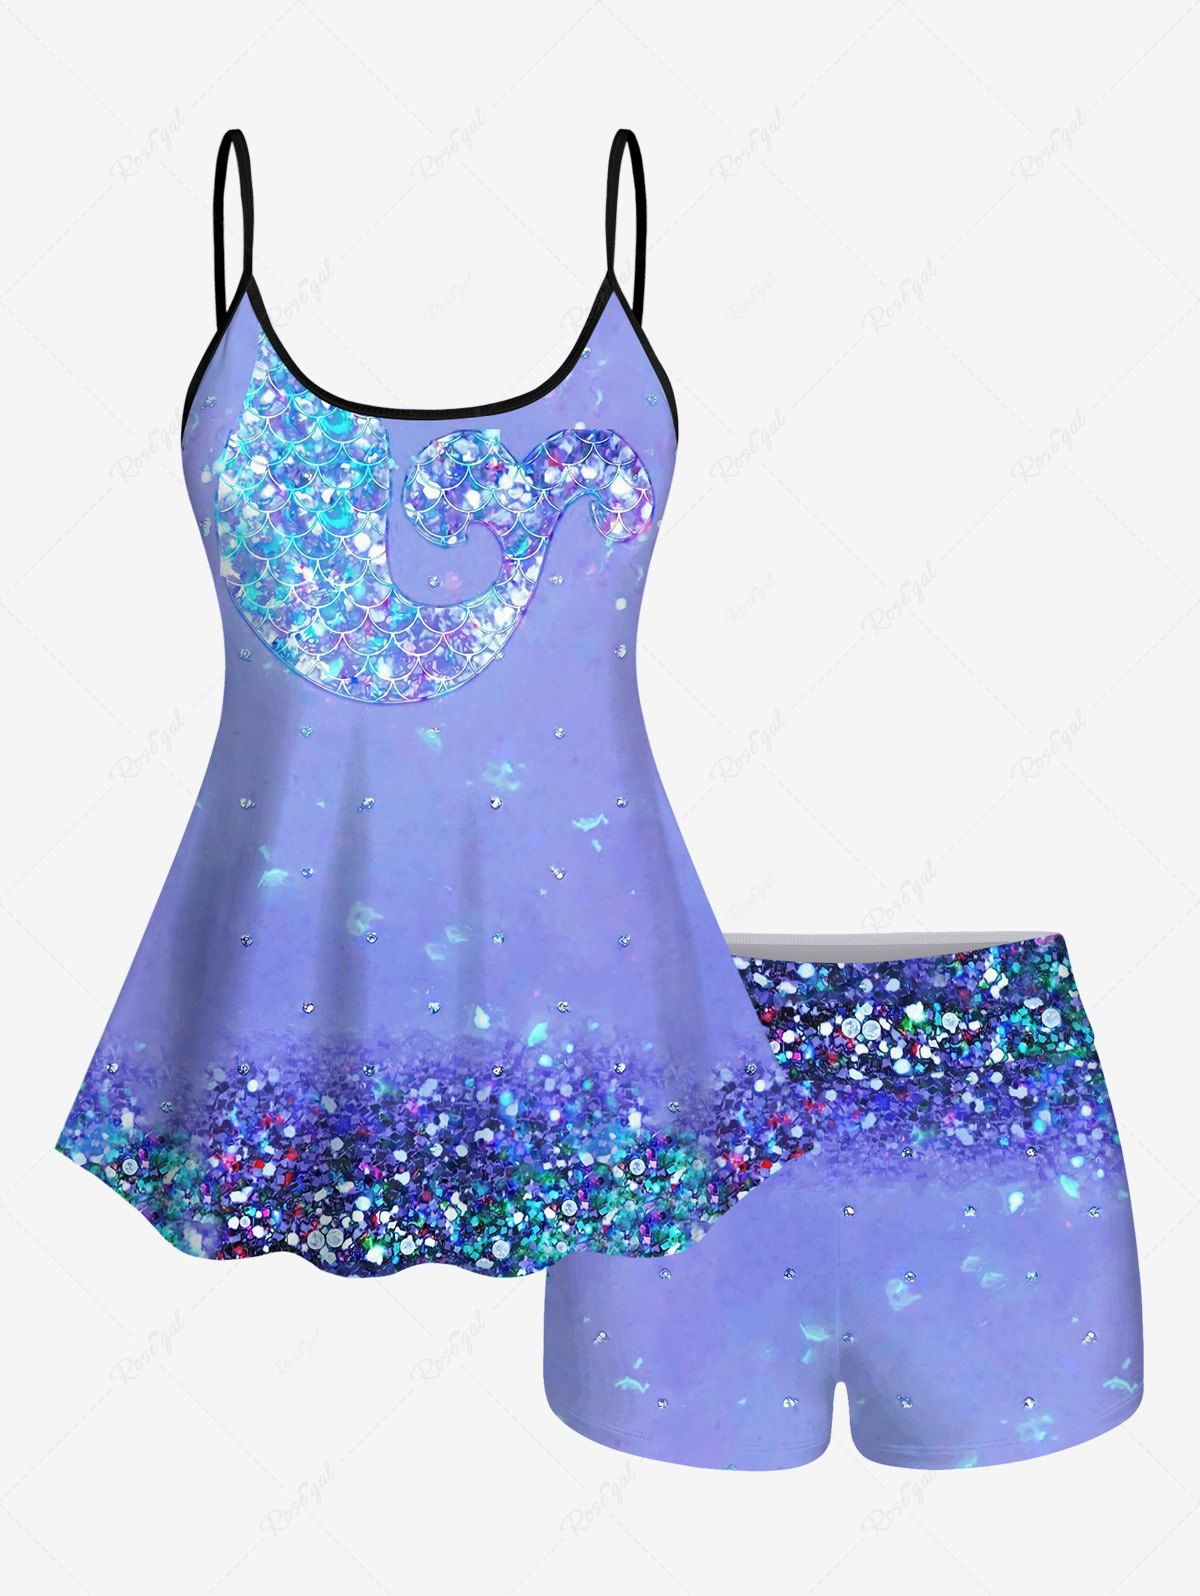 New Glitter Sparkling Sequins Fish Scale Mermaid Ombre Water Droplet Print Backless Boyleg Tankini Swimsuit (Adjustable Shoulder Strap)  